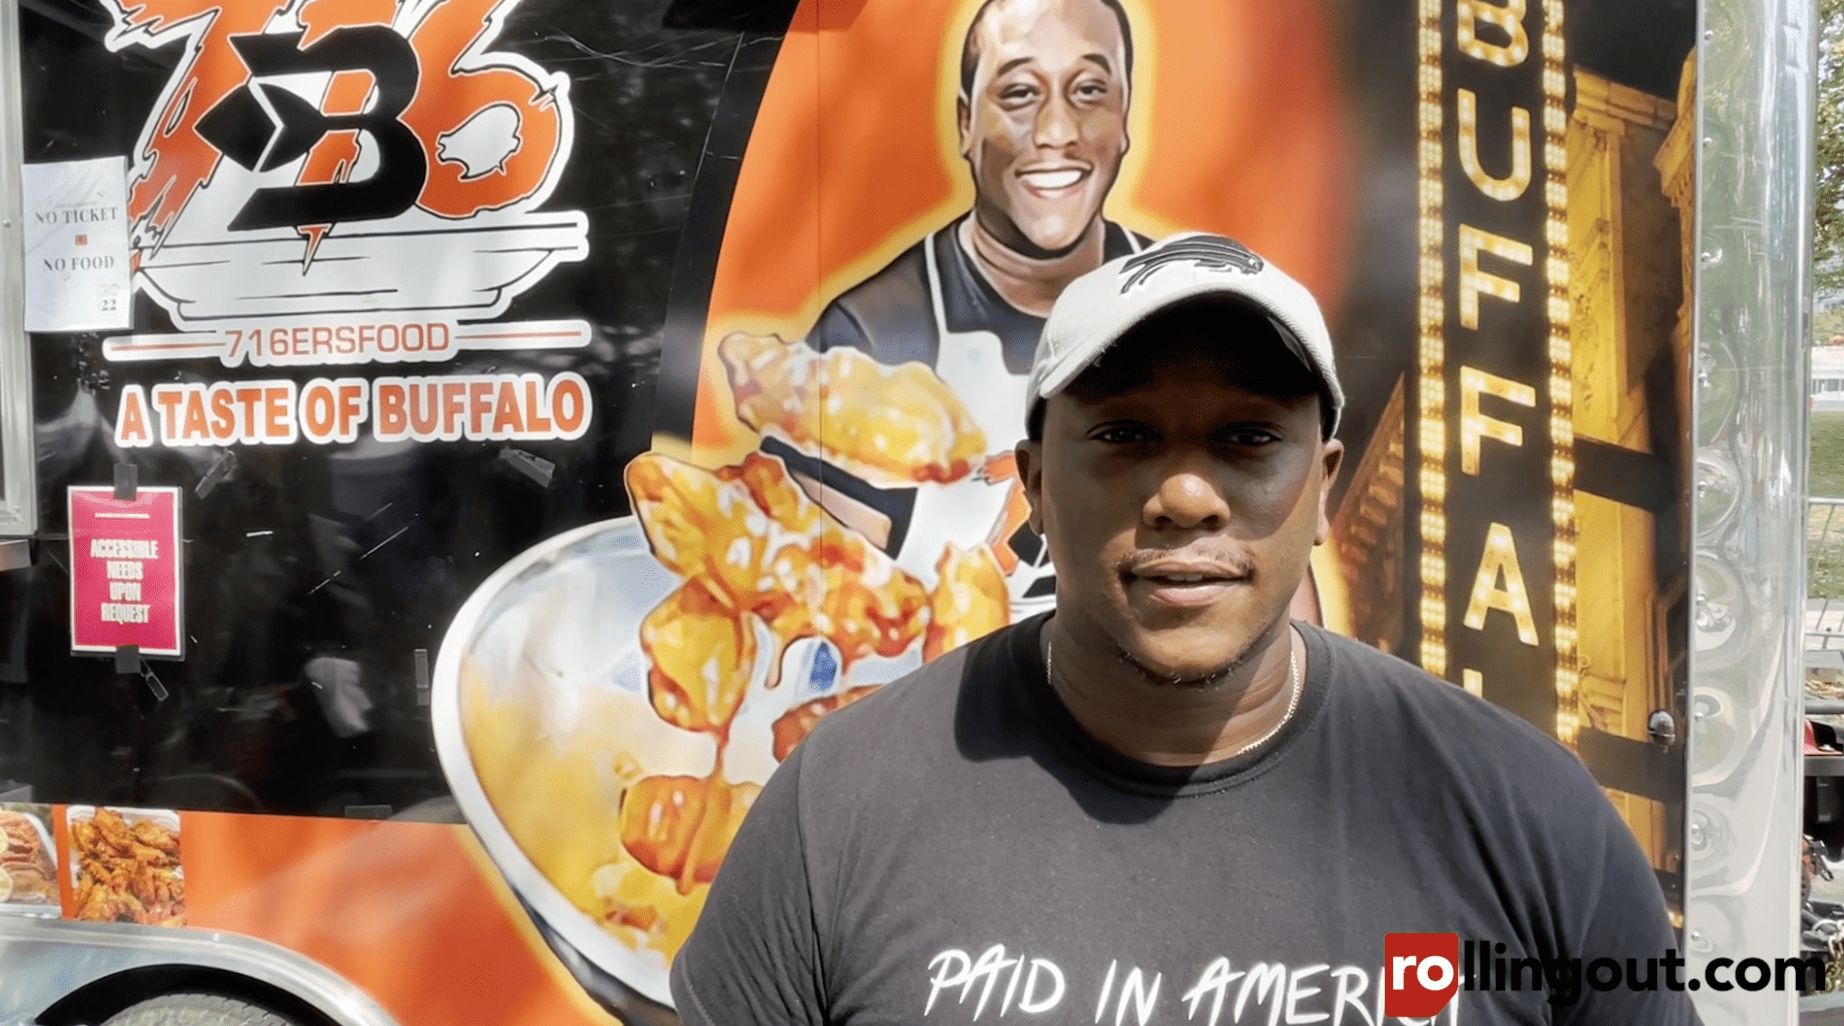 716ers owner Hassan Shaheed plans to build generational wealth with food truck